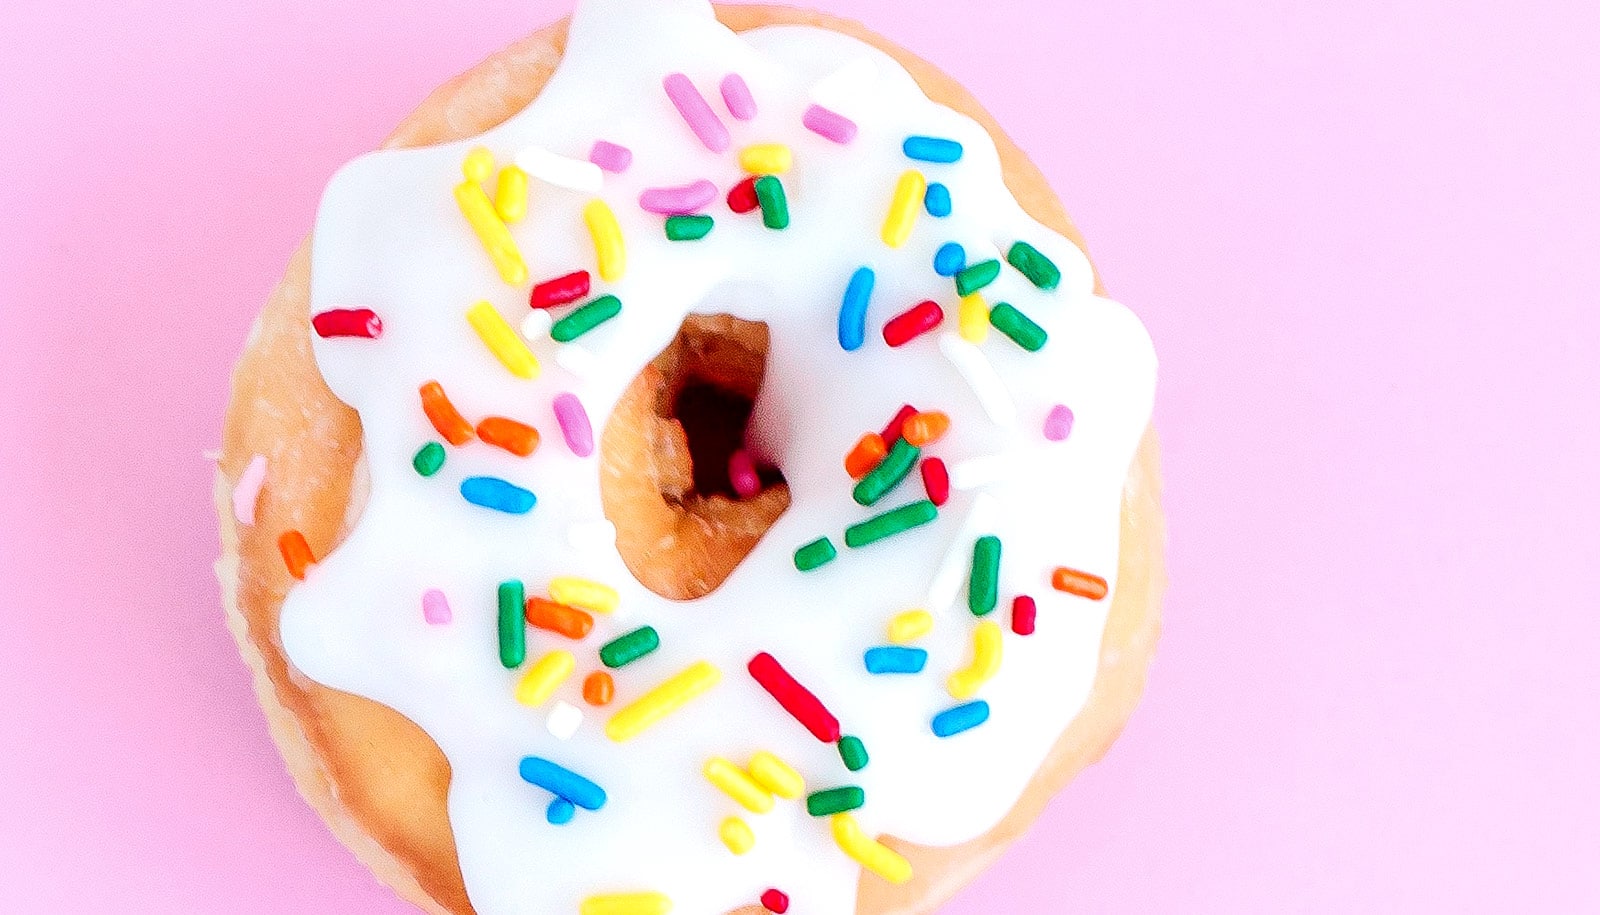 A frosted donut with sprinkles on it on a pink background.